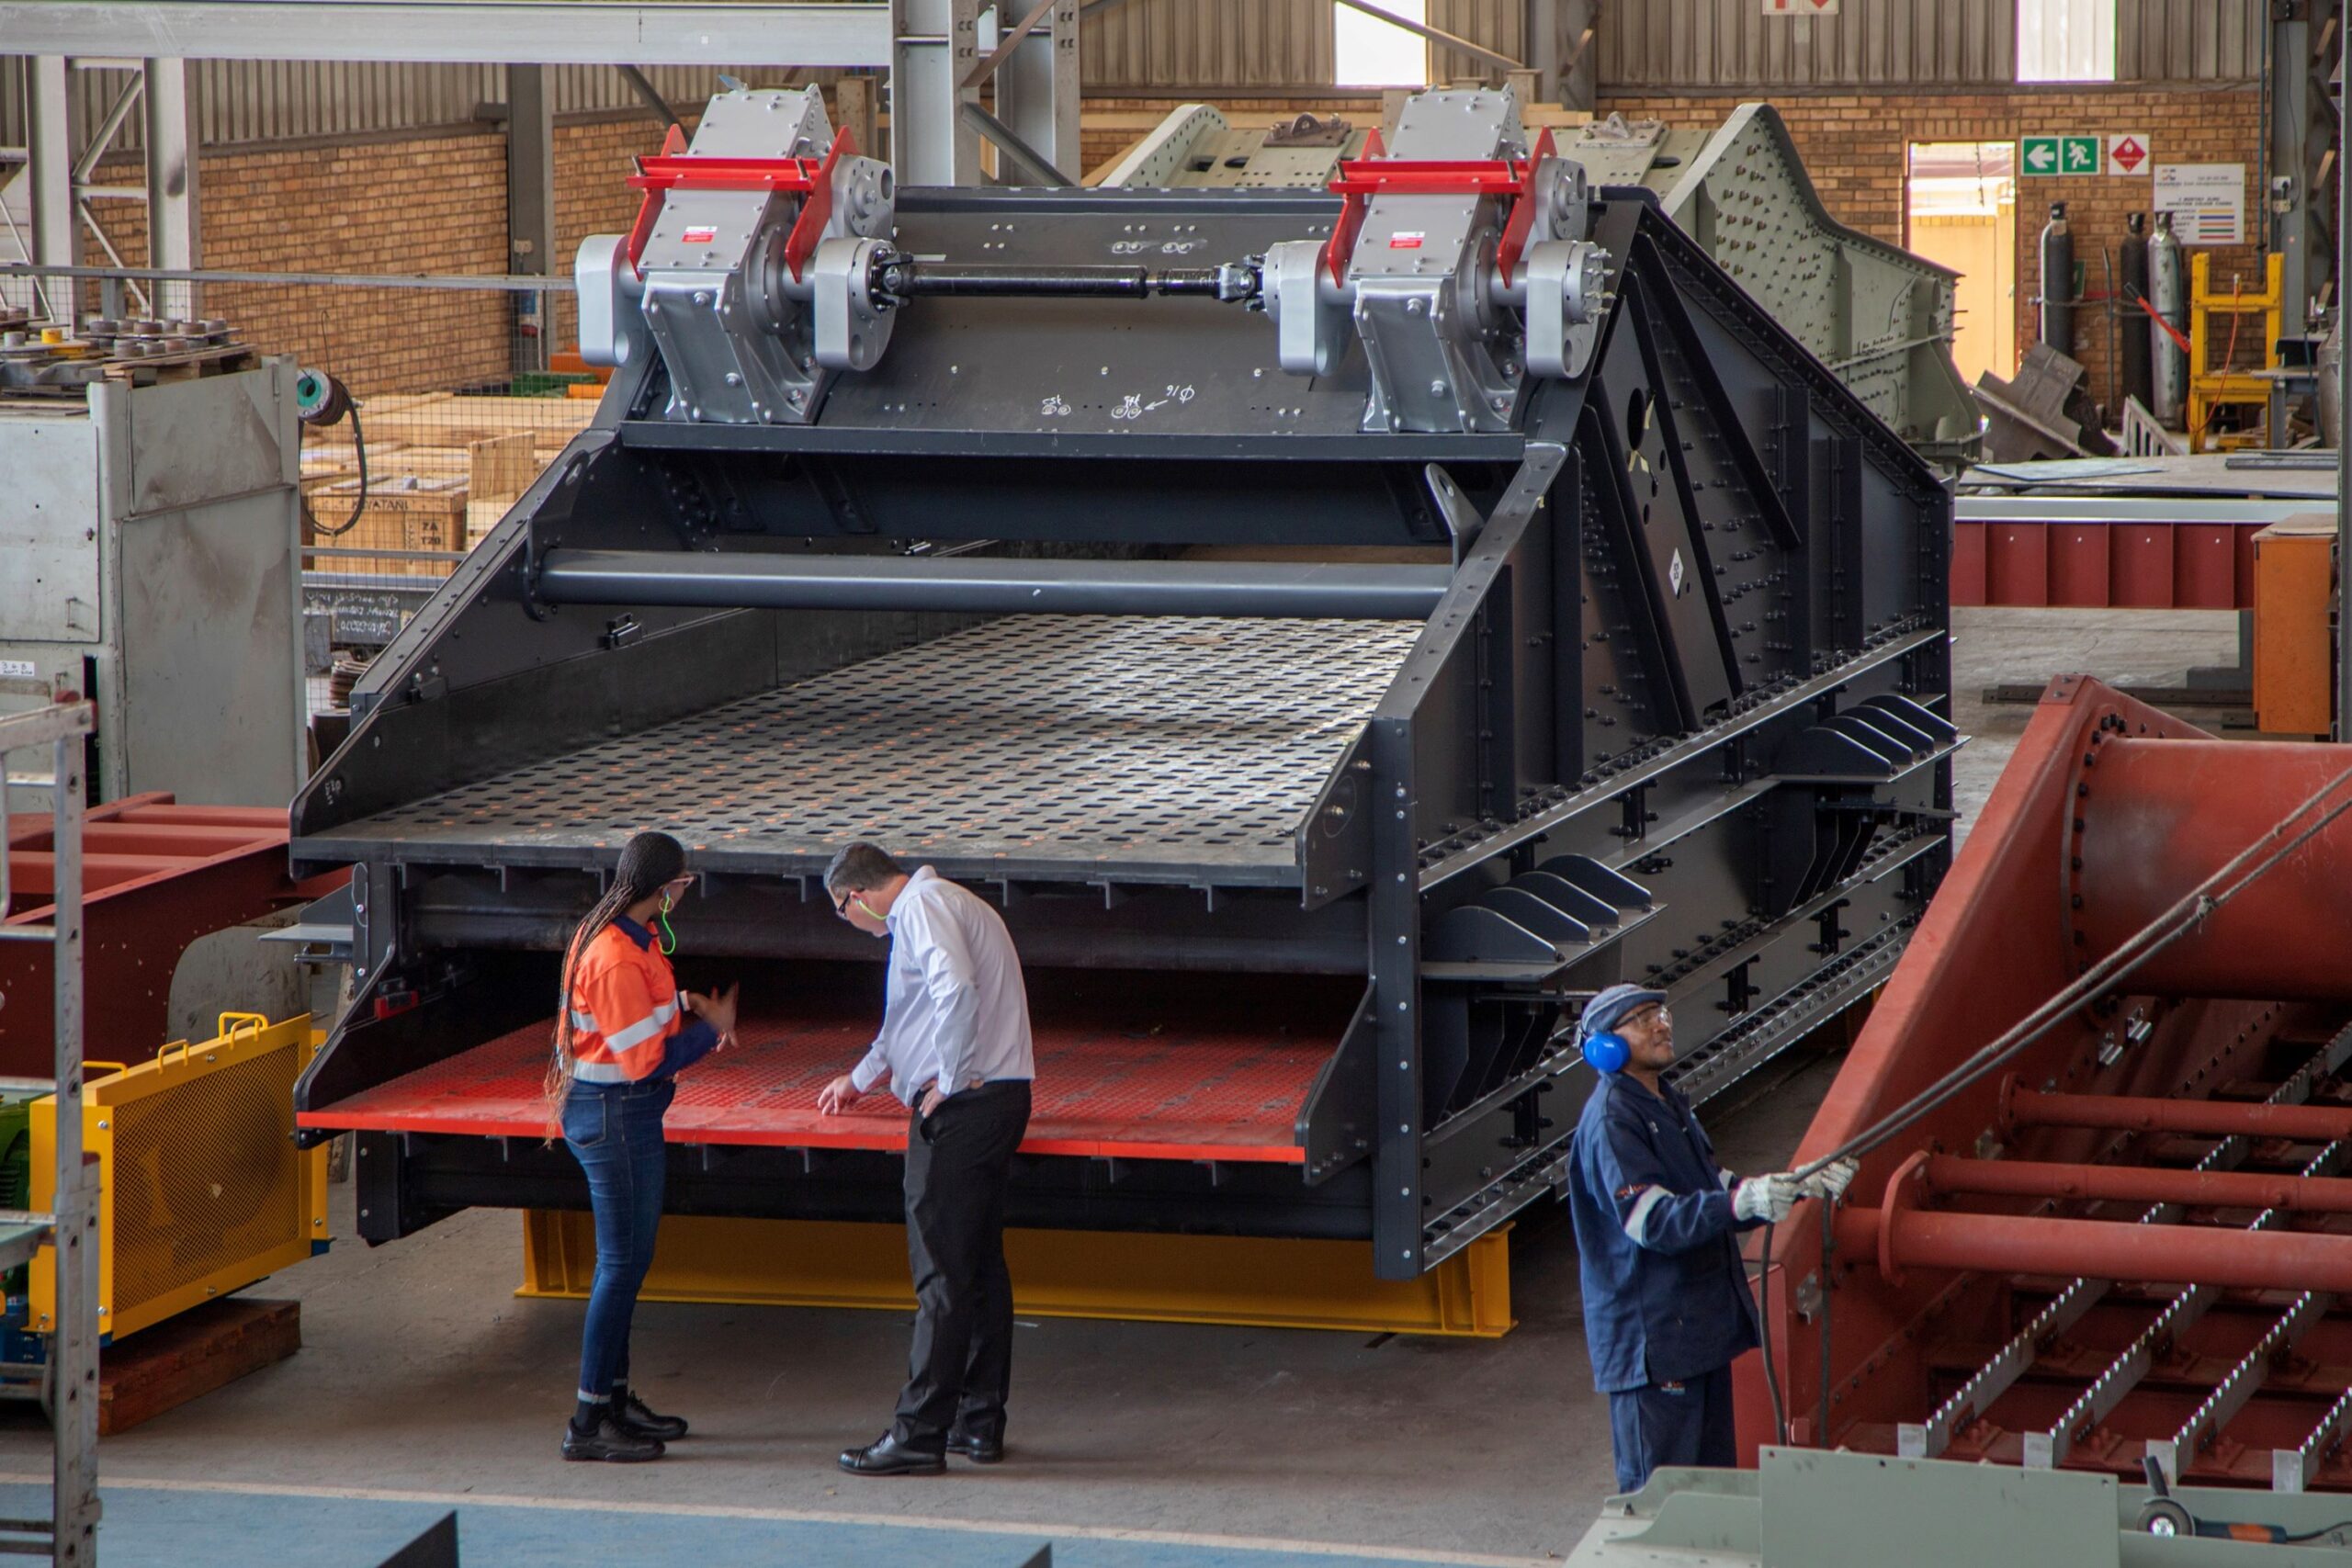 To keep pace with record orders, Sandvik Rock Processing is driving manufacturing agility.